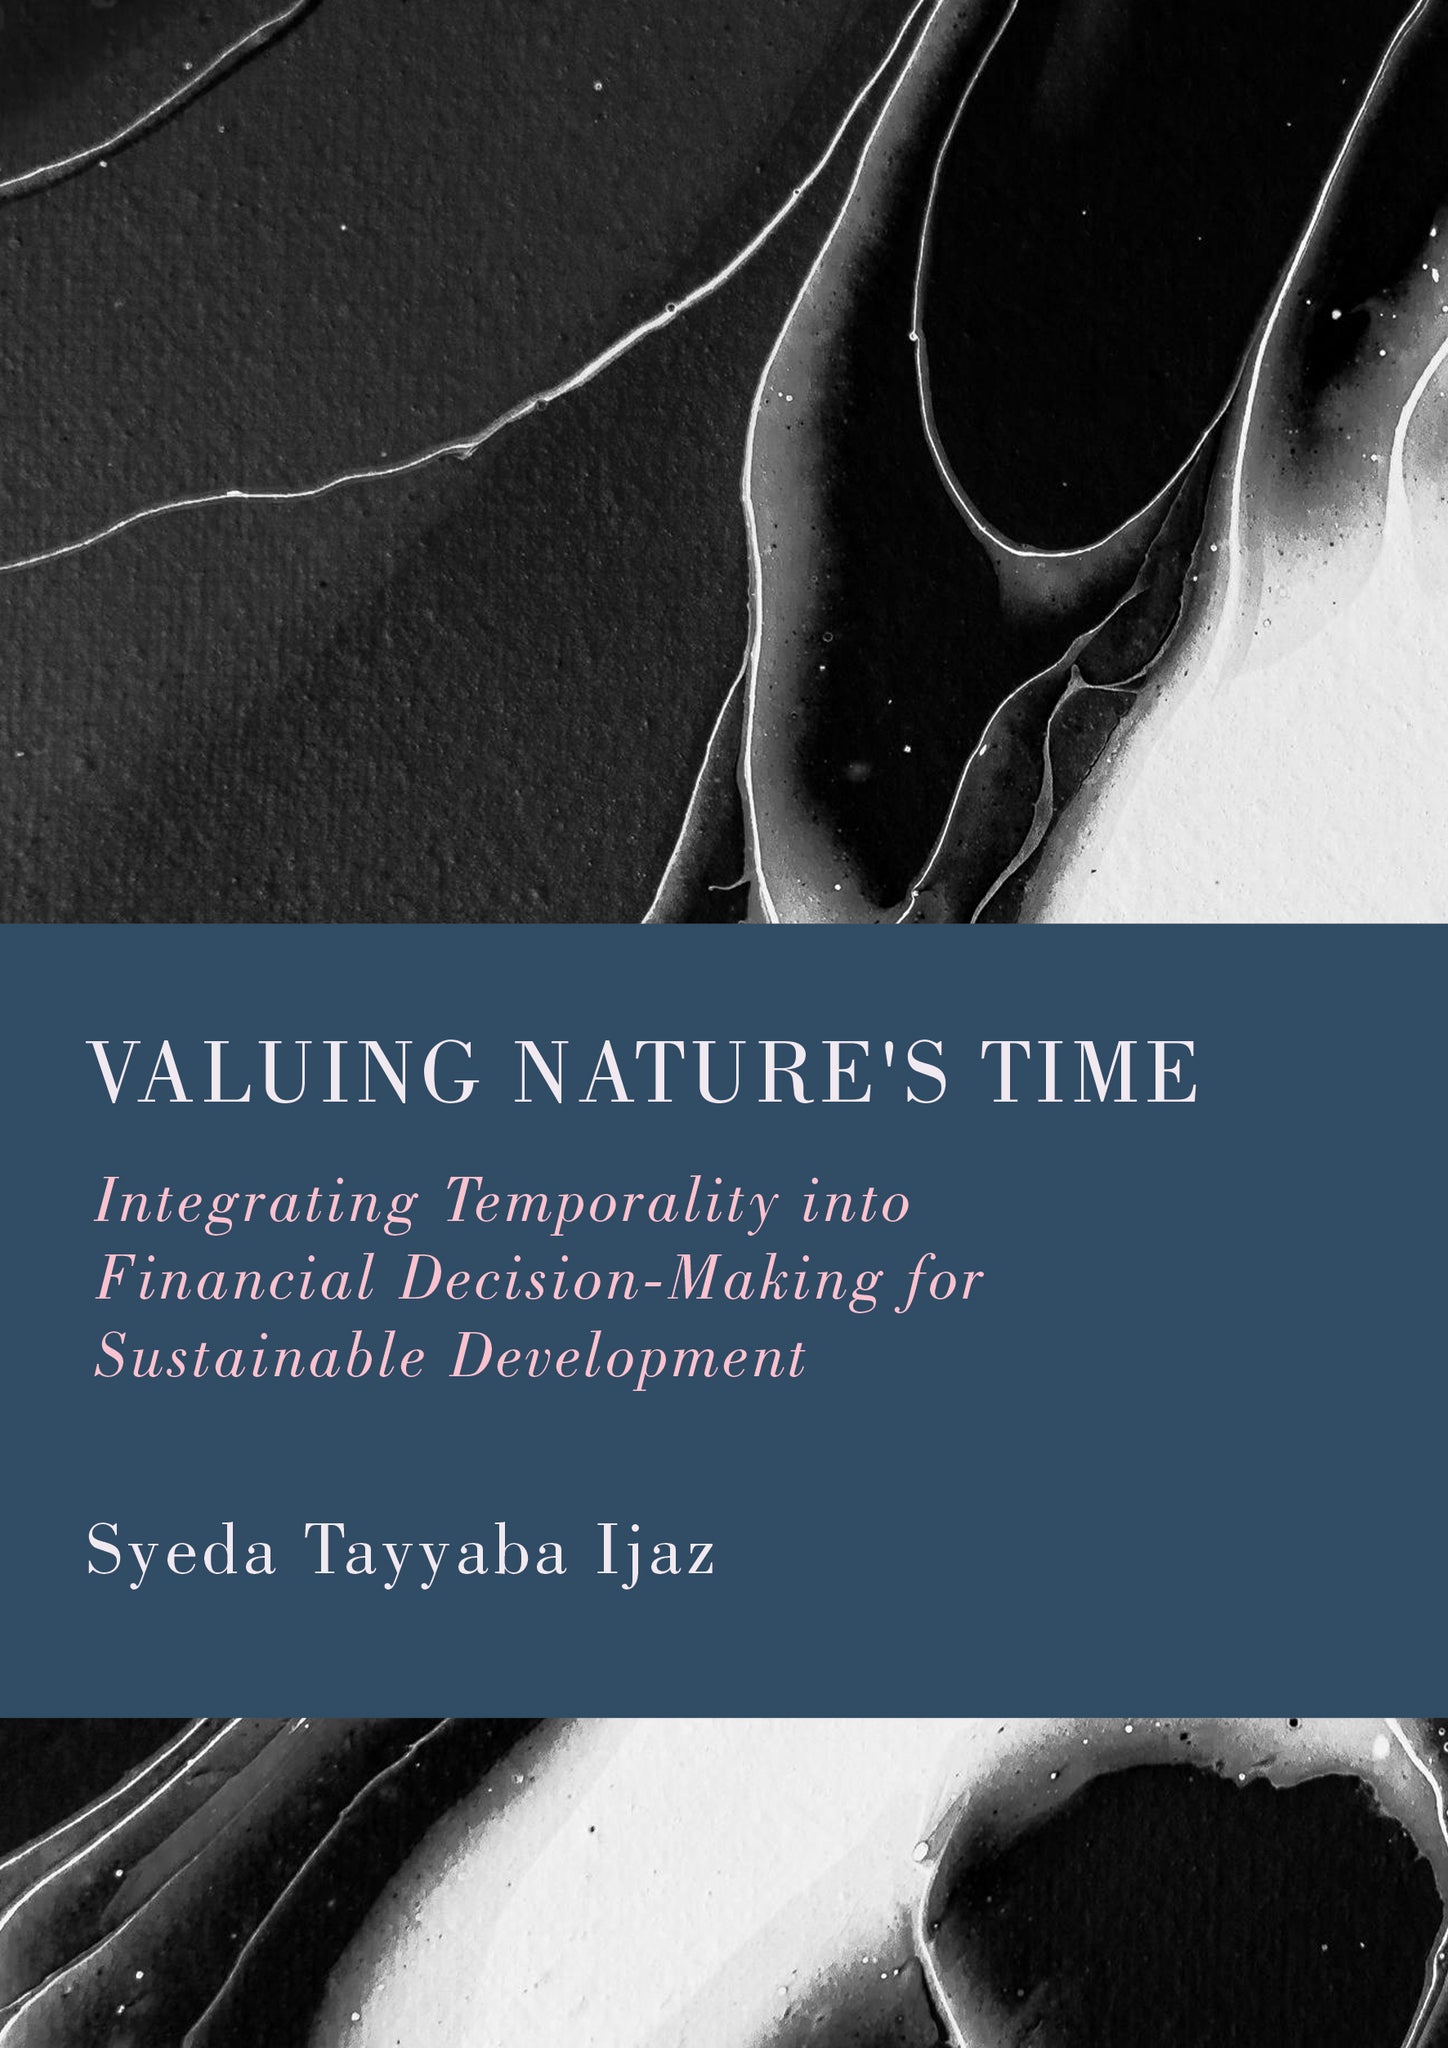 Valuing Nature's Time: Integrating Temporality into Financial Decision-Making for Sustainable Development